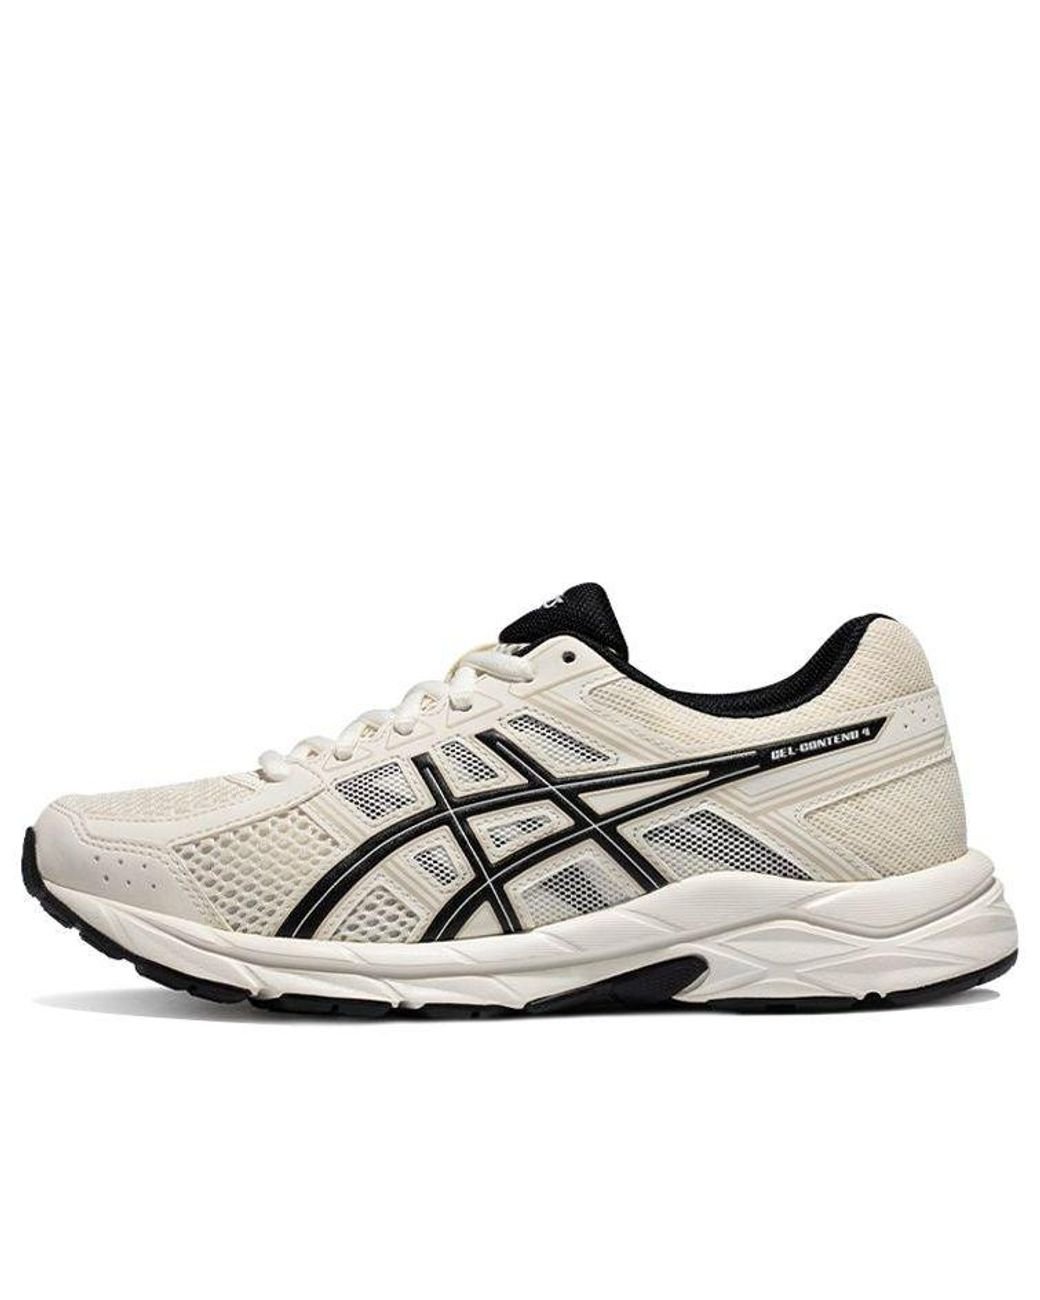 Asics Gel-contend in White |